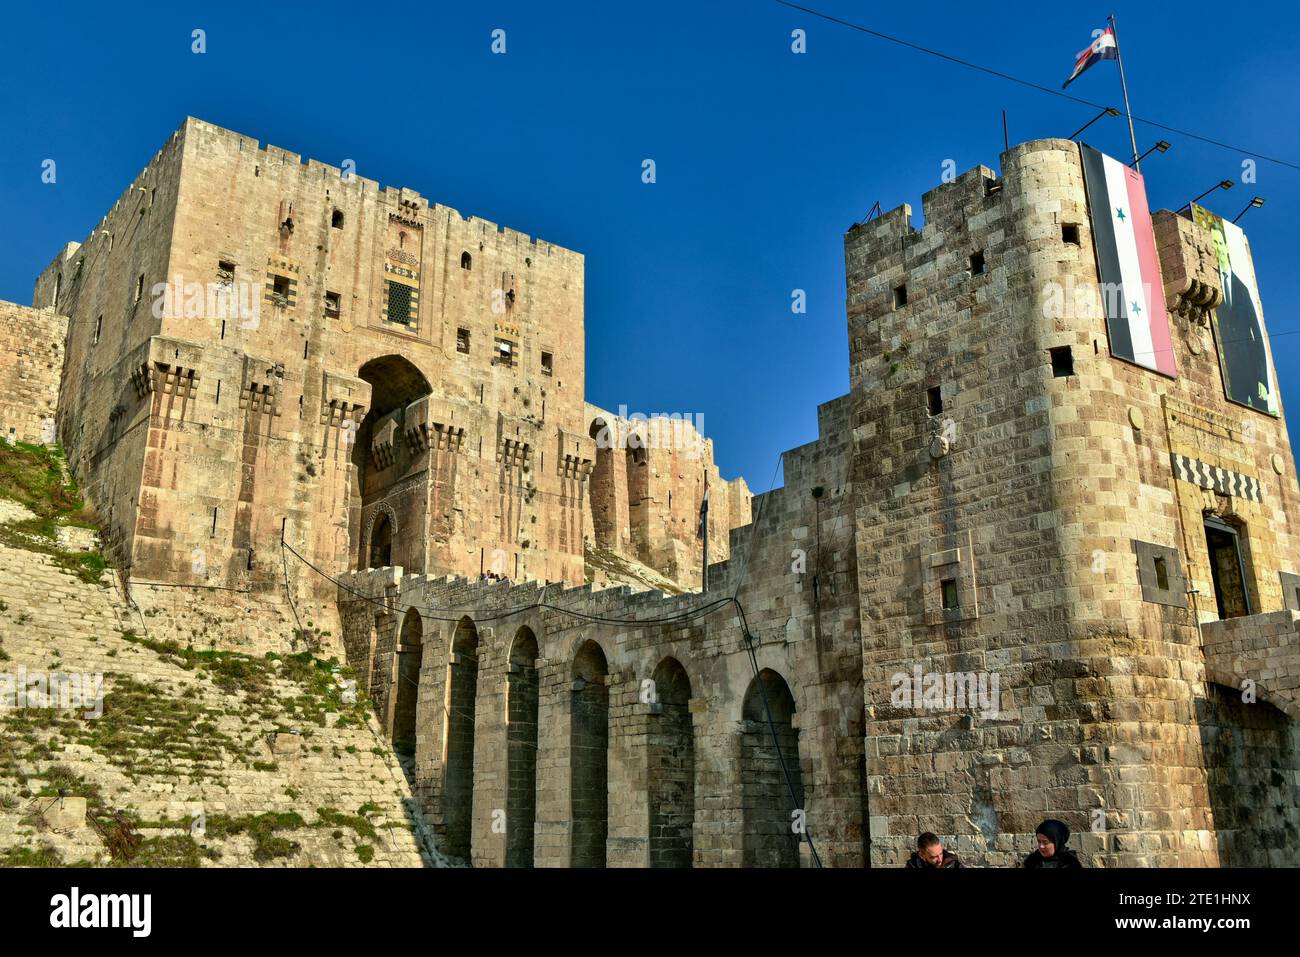 Syrian Flag and photo of Bashar al-Assad on the front gate of the Citadel of Aleppo, one of the oldest and largest castles in the world Stock Photo